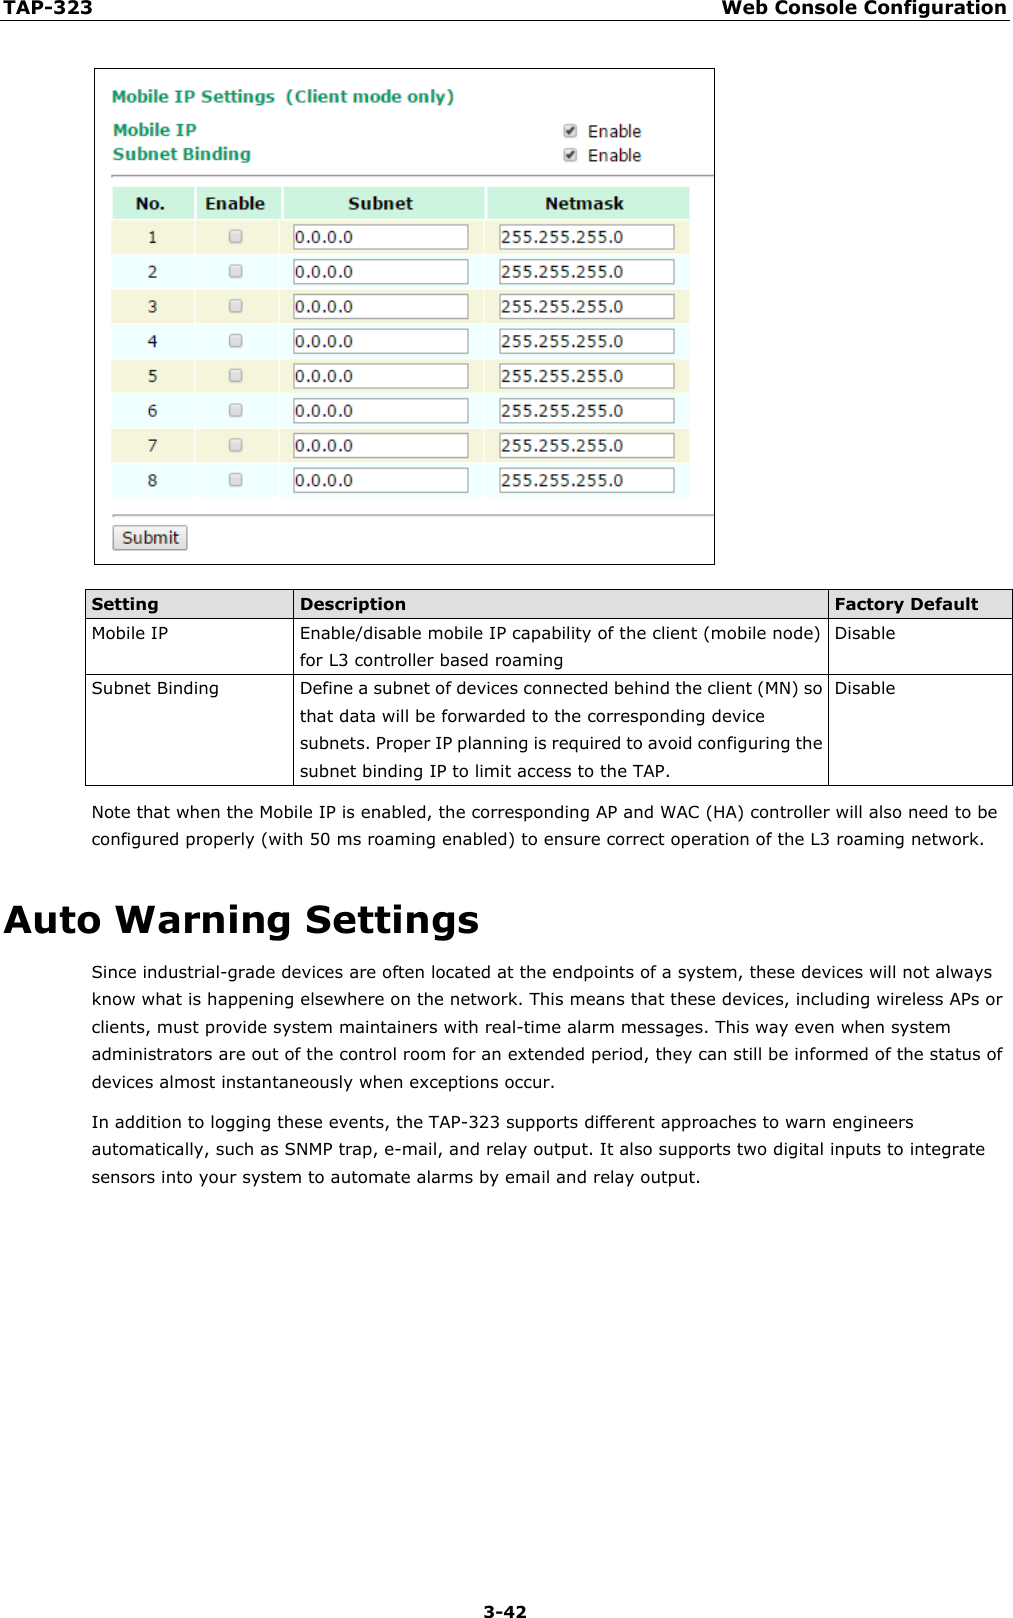 TAP-323 Web Console Configuration  3-42  Setting Description Factory Default Mobile IP Enable/disable mobile IP capability of the client (mobile node) for L3 controller based roaming Disable Subnet Binding Define a subnet of devices connected behind the client (MN) so that data will be forwarded to the corresponding device subnets. Proper IP planning is required to avoid configuring the subnet binding IP to limit access to the TAP. Disable Note that when the Mobile IP is enabled, the corresponding AP and WAC (HA) controller will also need to be configured properly (with 50 ms roaming enabled) to ensure correct operation of the L3 roaming network. Auto Warning Settings Since industrial-grade devices are often located at the endpoints of a system, these devices will not always know what is happening elsewhere on the network. This means that these devices, including wireless APs or clients, must provide system maintainers with real-time alarm messages. This way even when system administrators are out of the control room for an extended period, they can still be informed of the status of devices almost instantaneously when exceptions occur. In addition to logging these events, the TAP-323 supports different approaches to warn engineers automatically, such as SNMP trap, e-mail, and relay output. It also supports two digital inputs to integrate sensors into your system to automate alarms by email and relay output.      